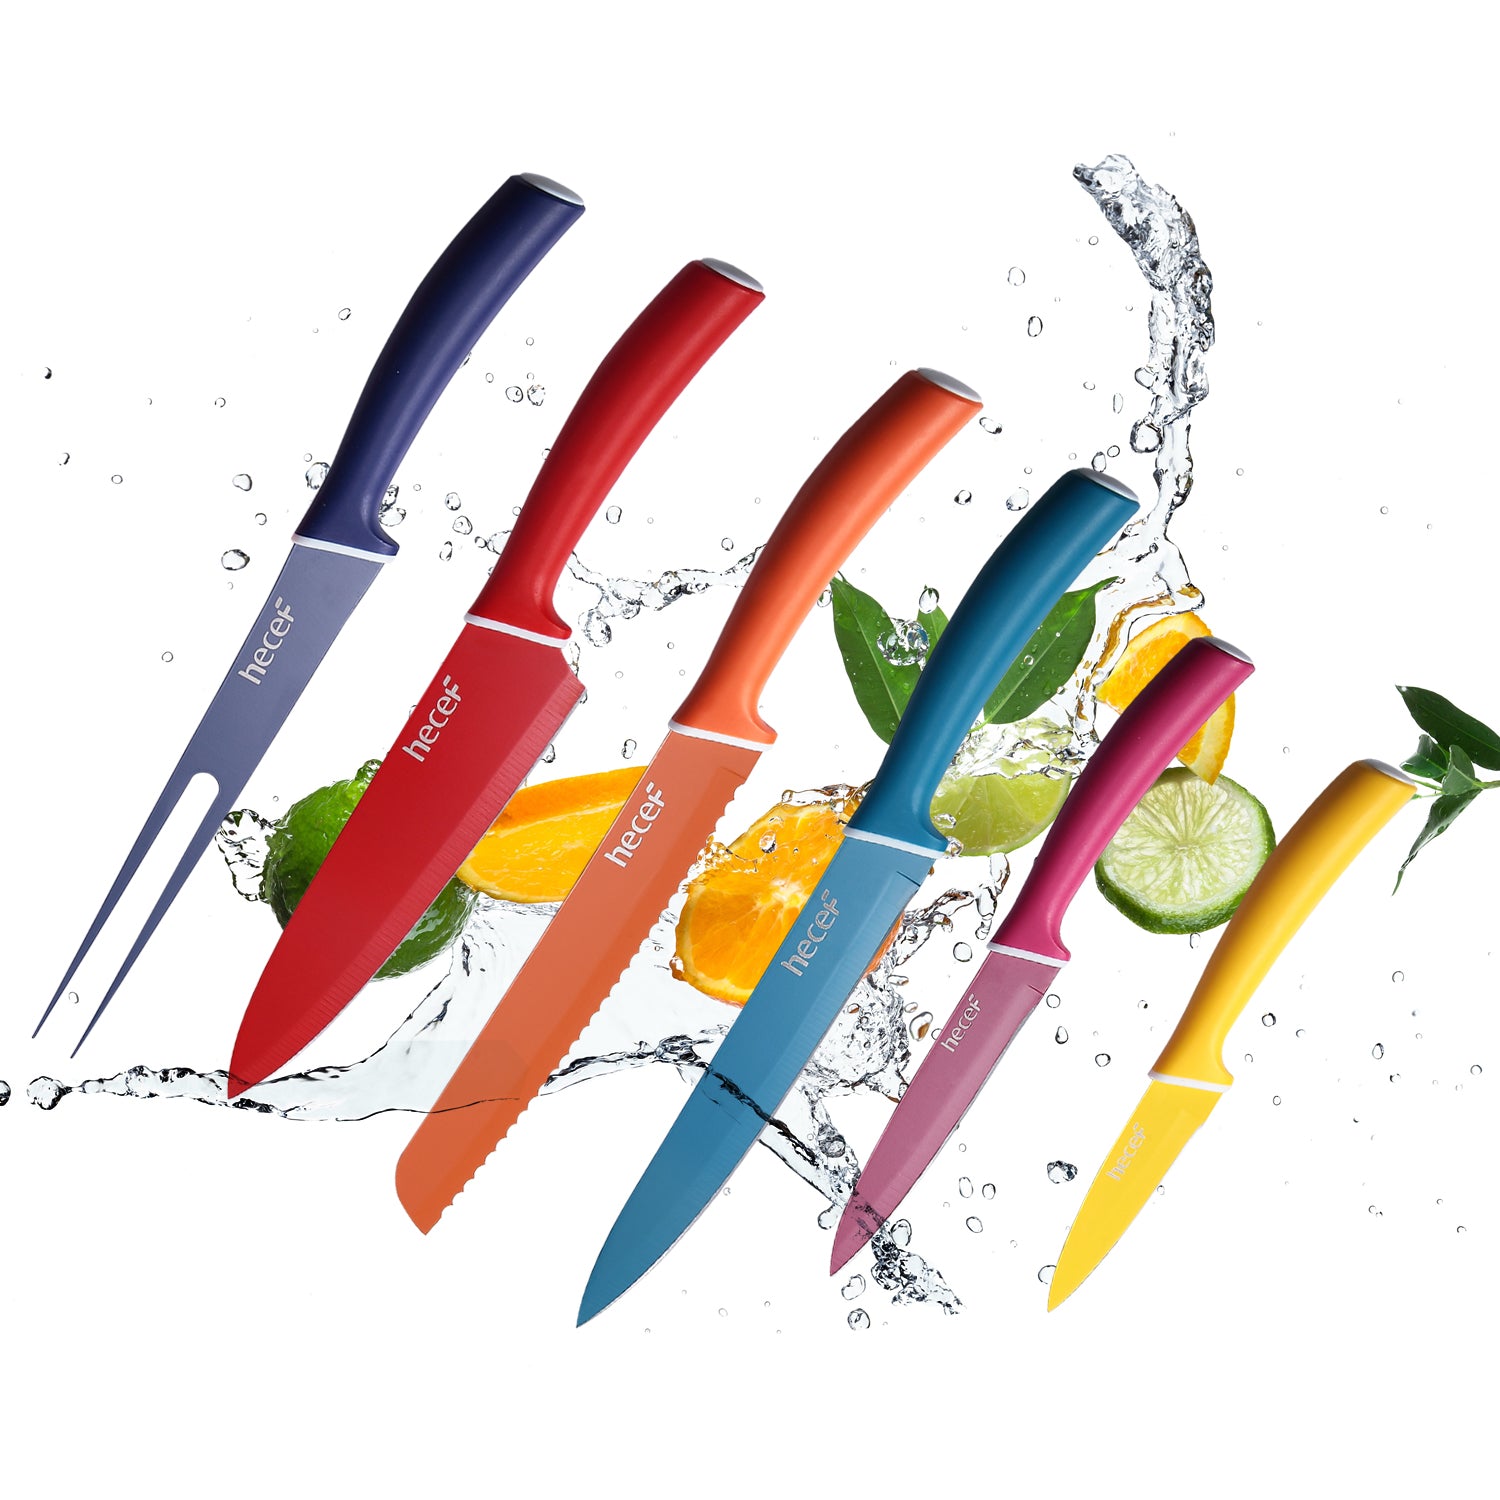 Hecef Kitchen Multicolored Rainbow Knife Set of 6 with Sheaths - Hecef Kitchen